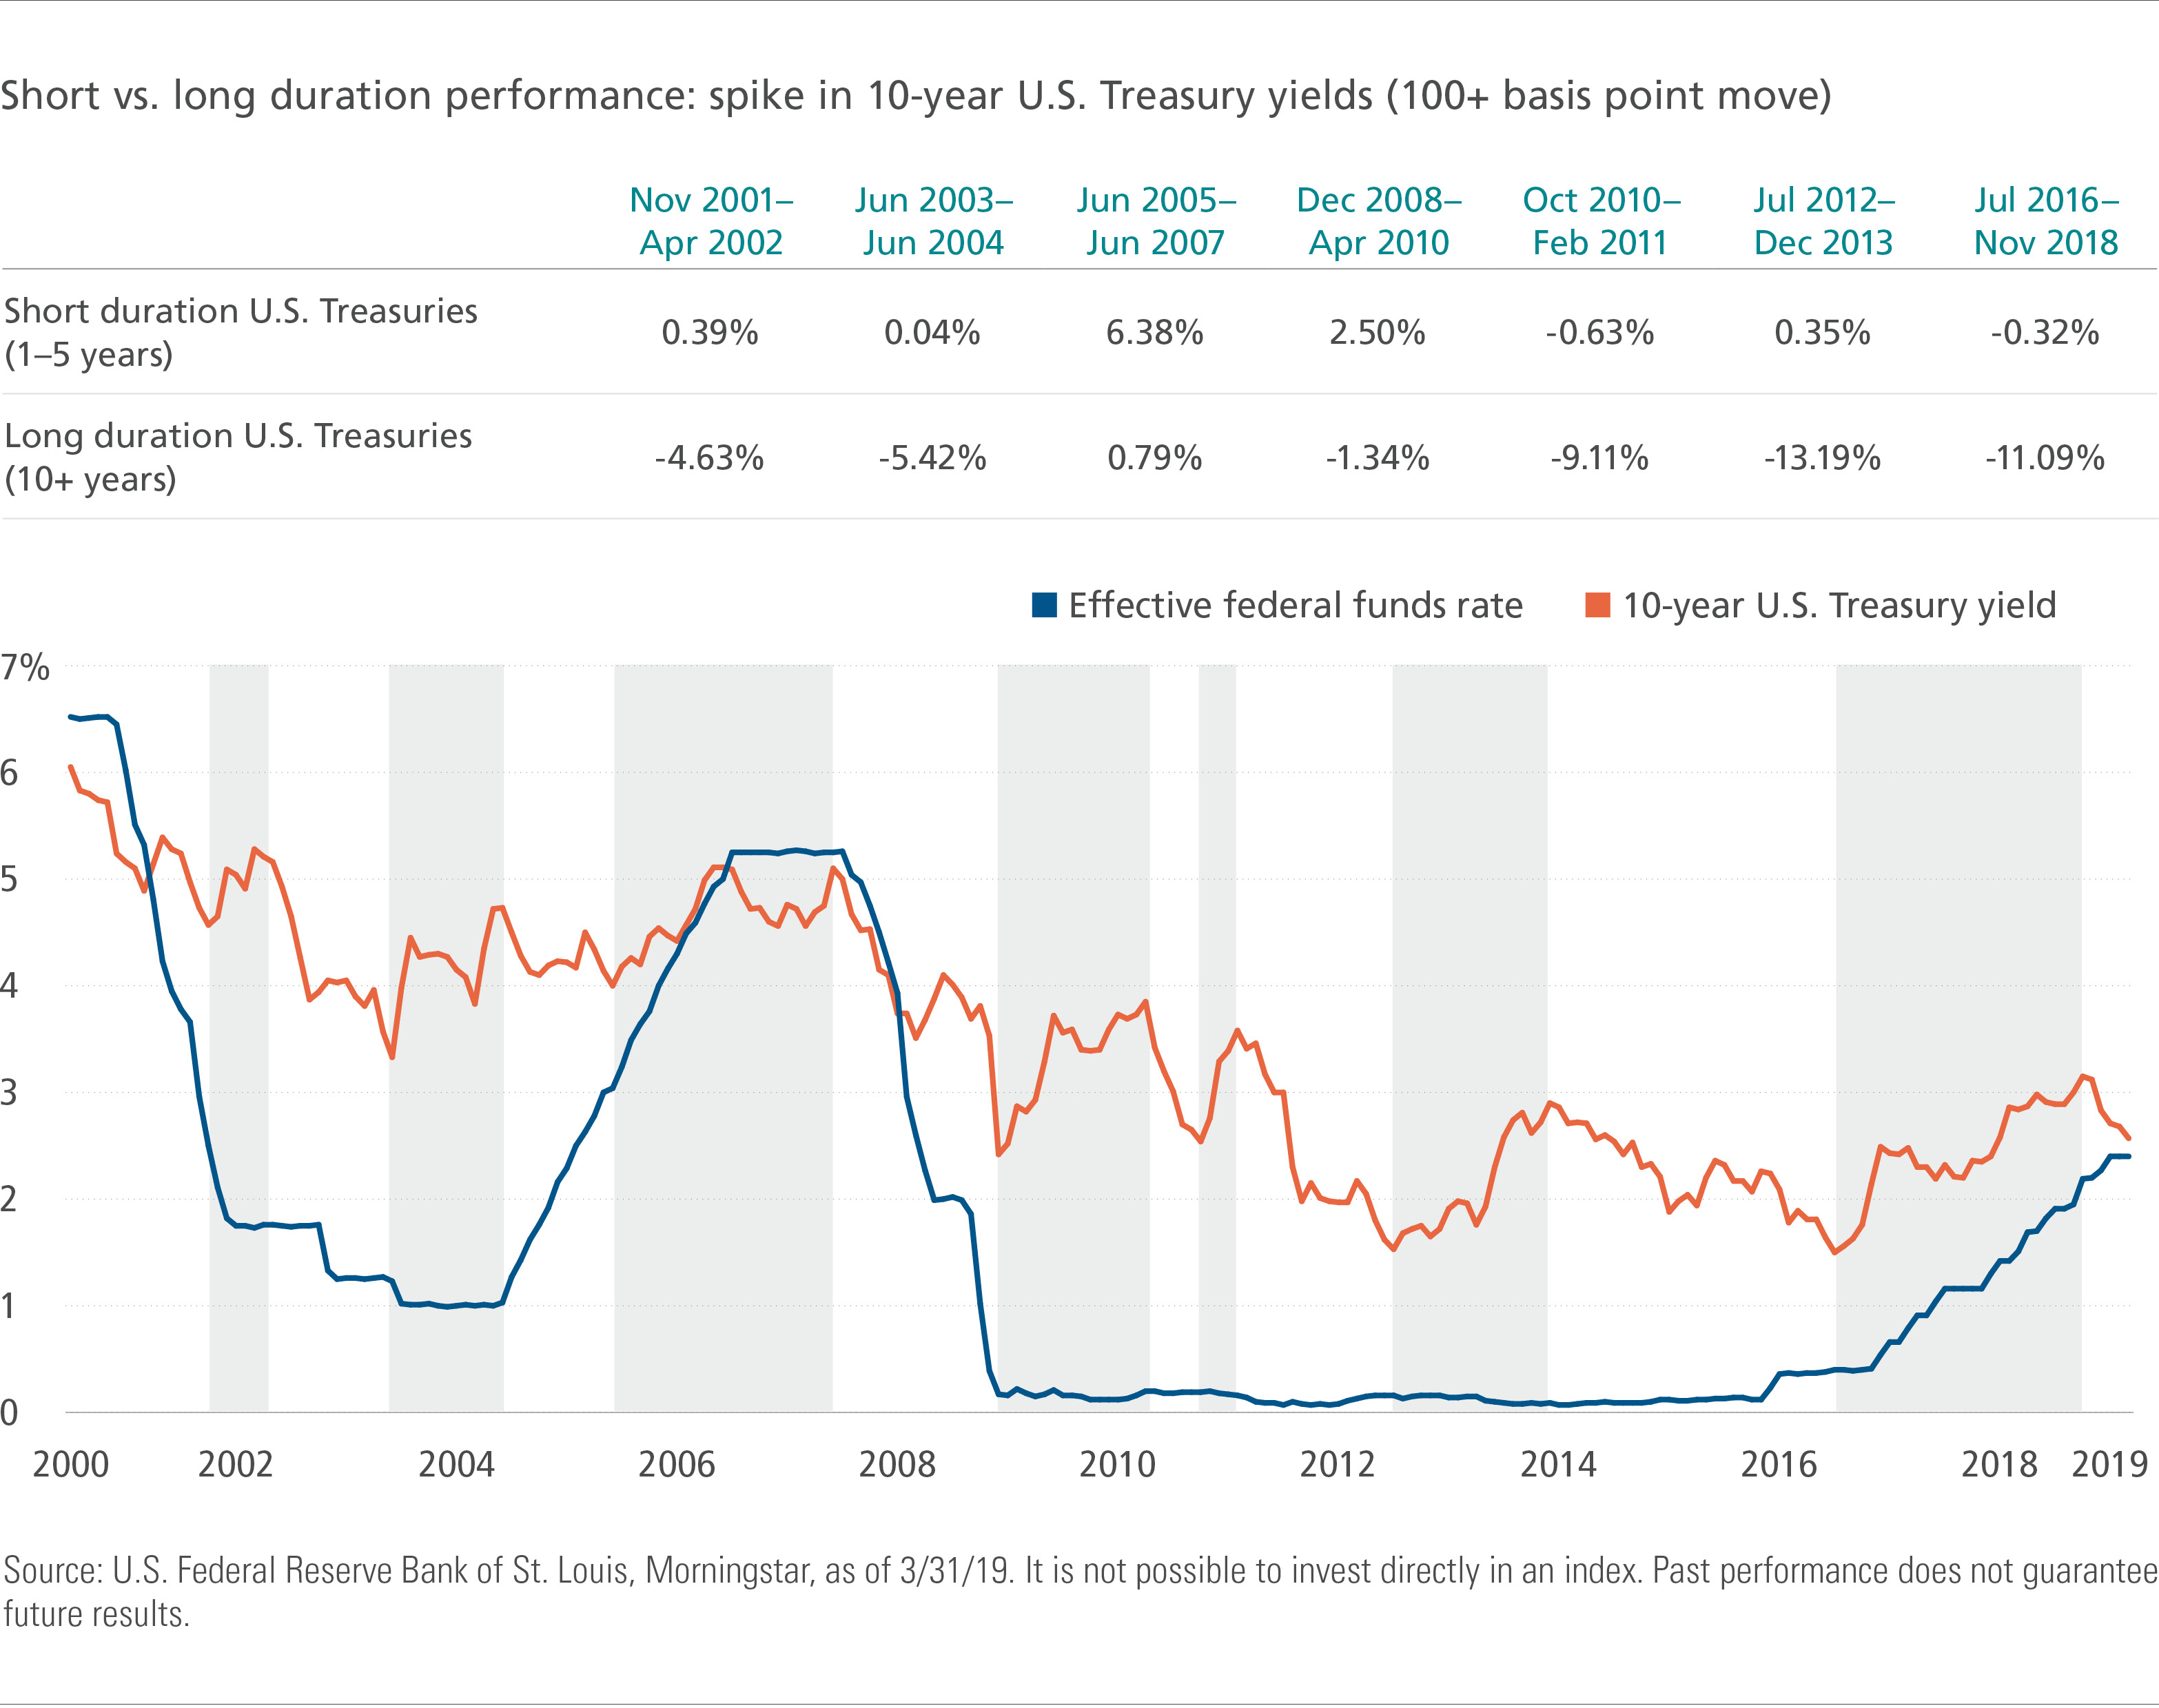 Short vs. long duration performance: spike in 10-year U.S. Treasury yields (100+ basis points move)